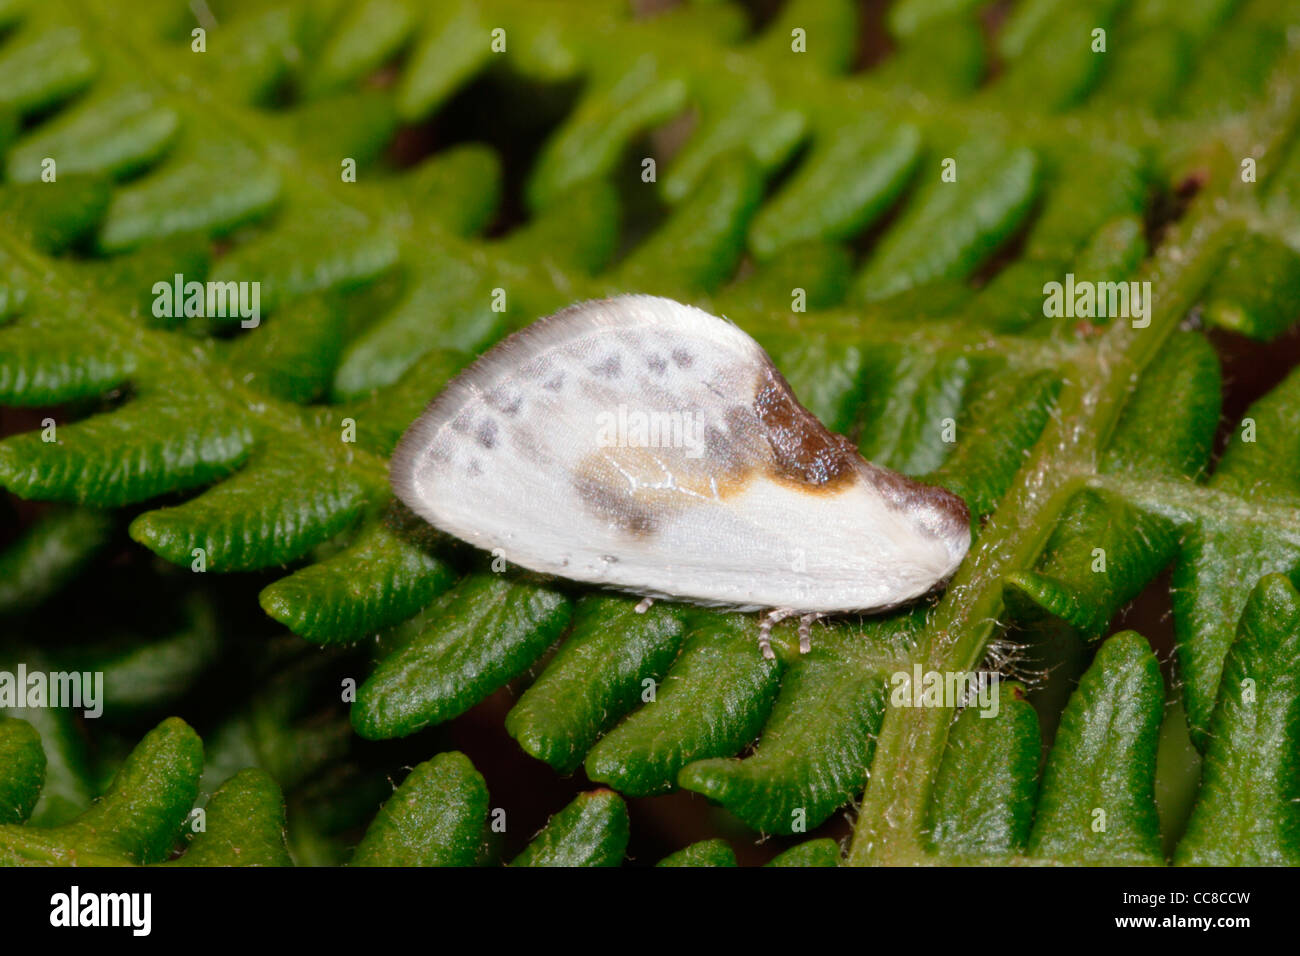 Chinese character moth (Cilix glaucata : Drepanidae) resembling a bird-dropping while sitting in full view on bracken, UK. Stock Photo